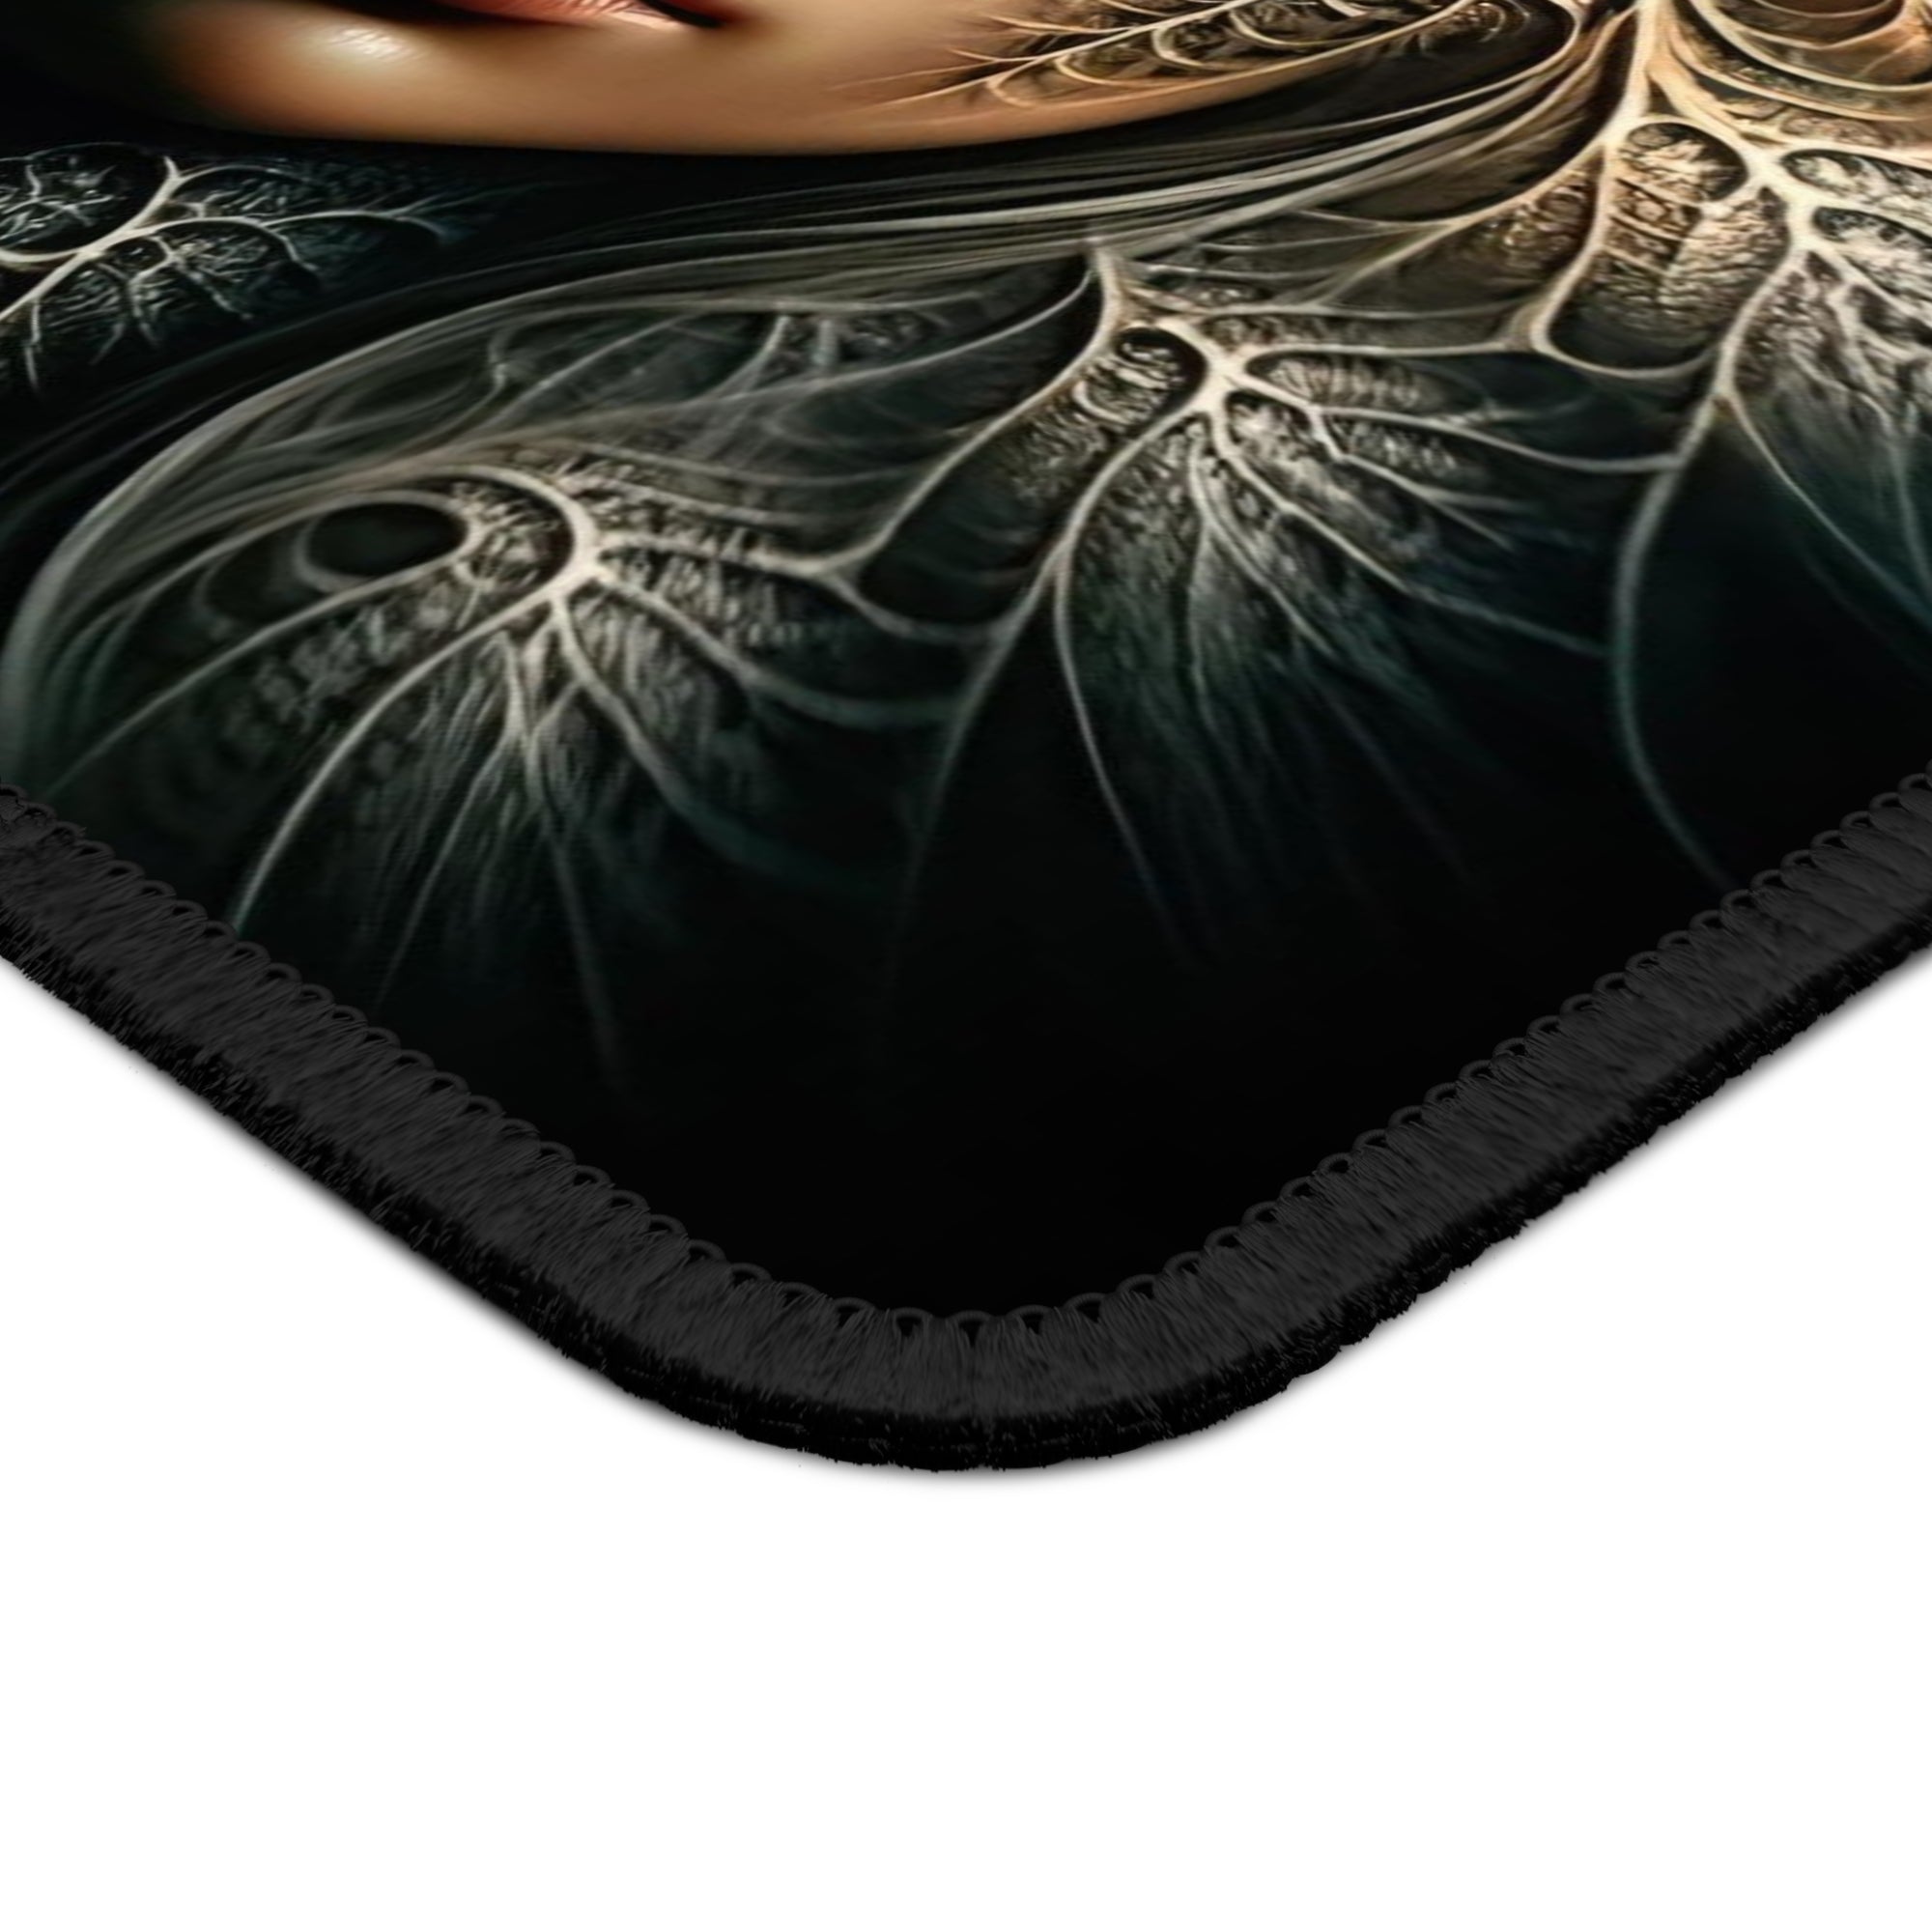 Mirrored Souls Gaming Mouse Pad